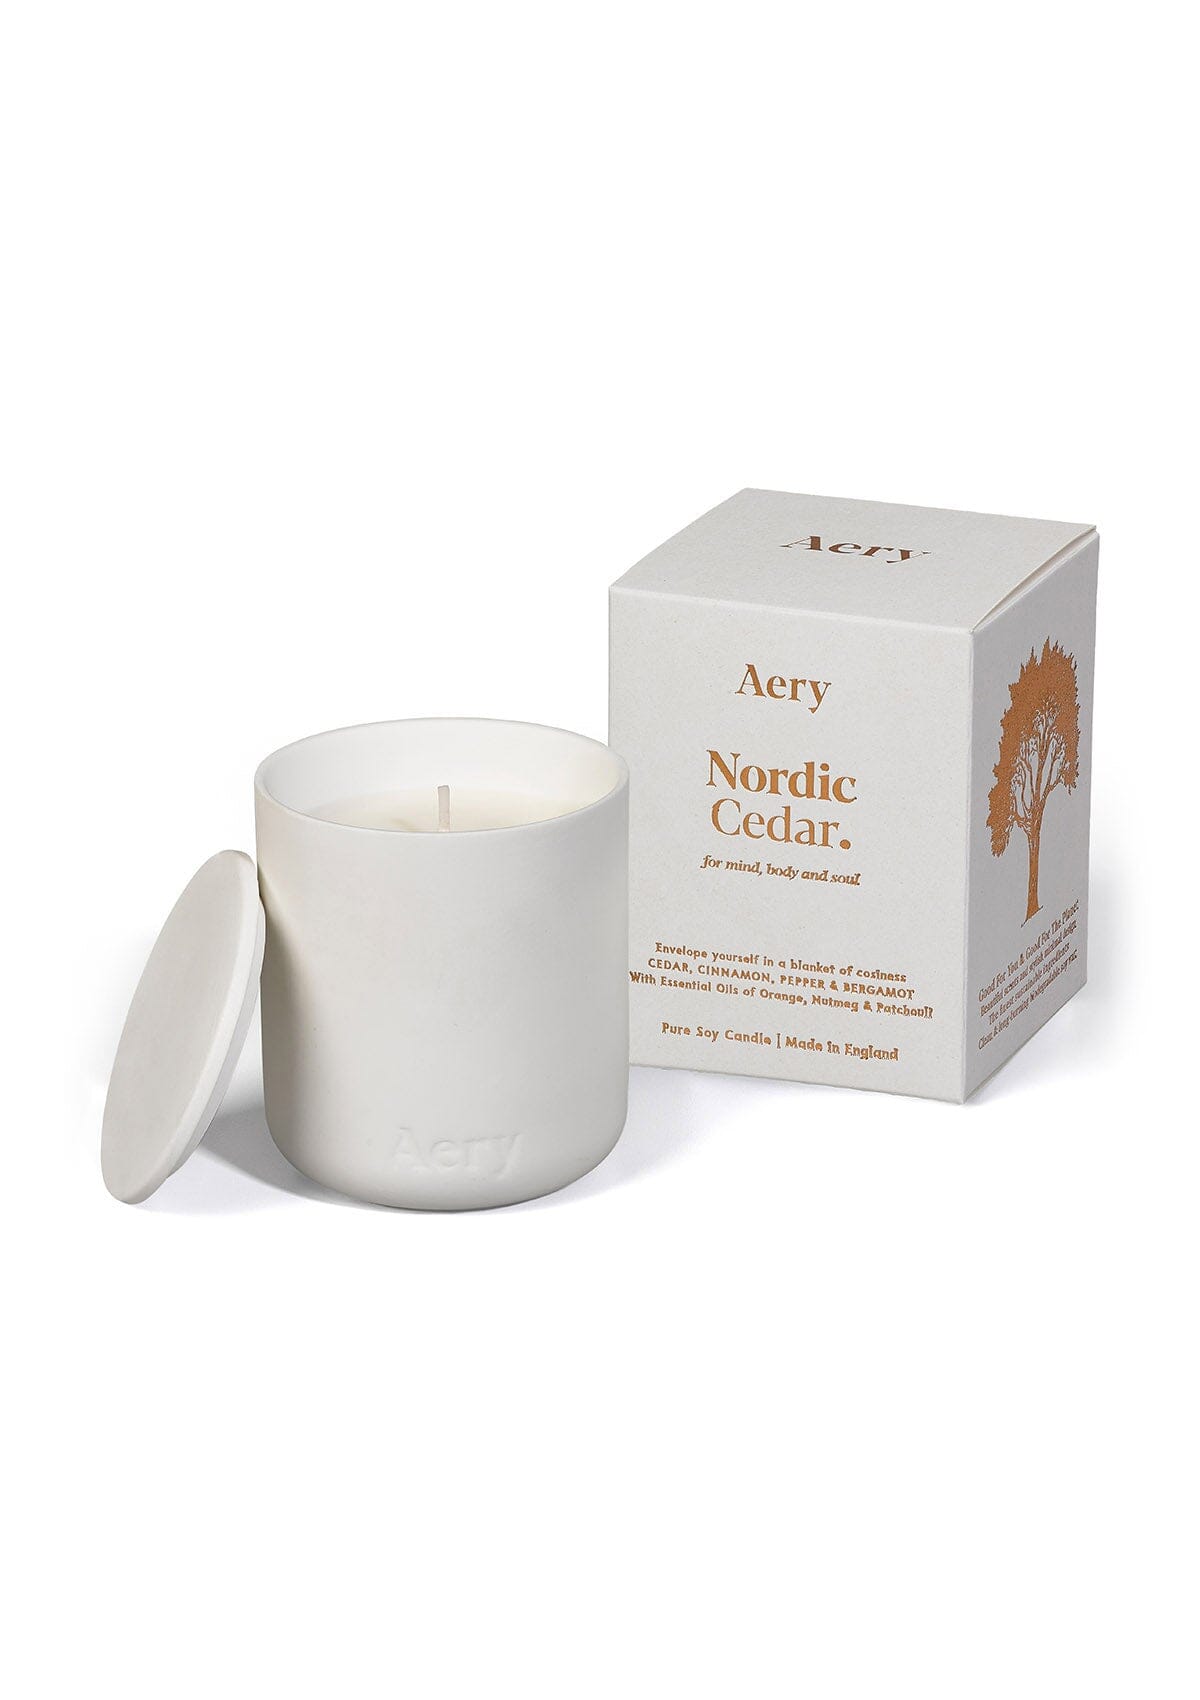 White Nordic Cedar ceramic scented candle displayed next to product packaging by Aery on white background 